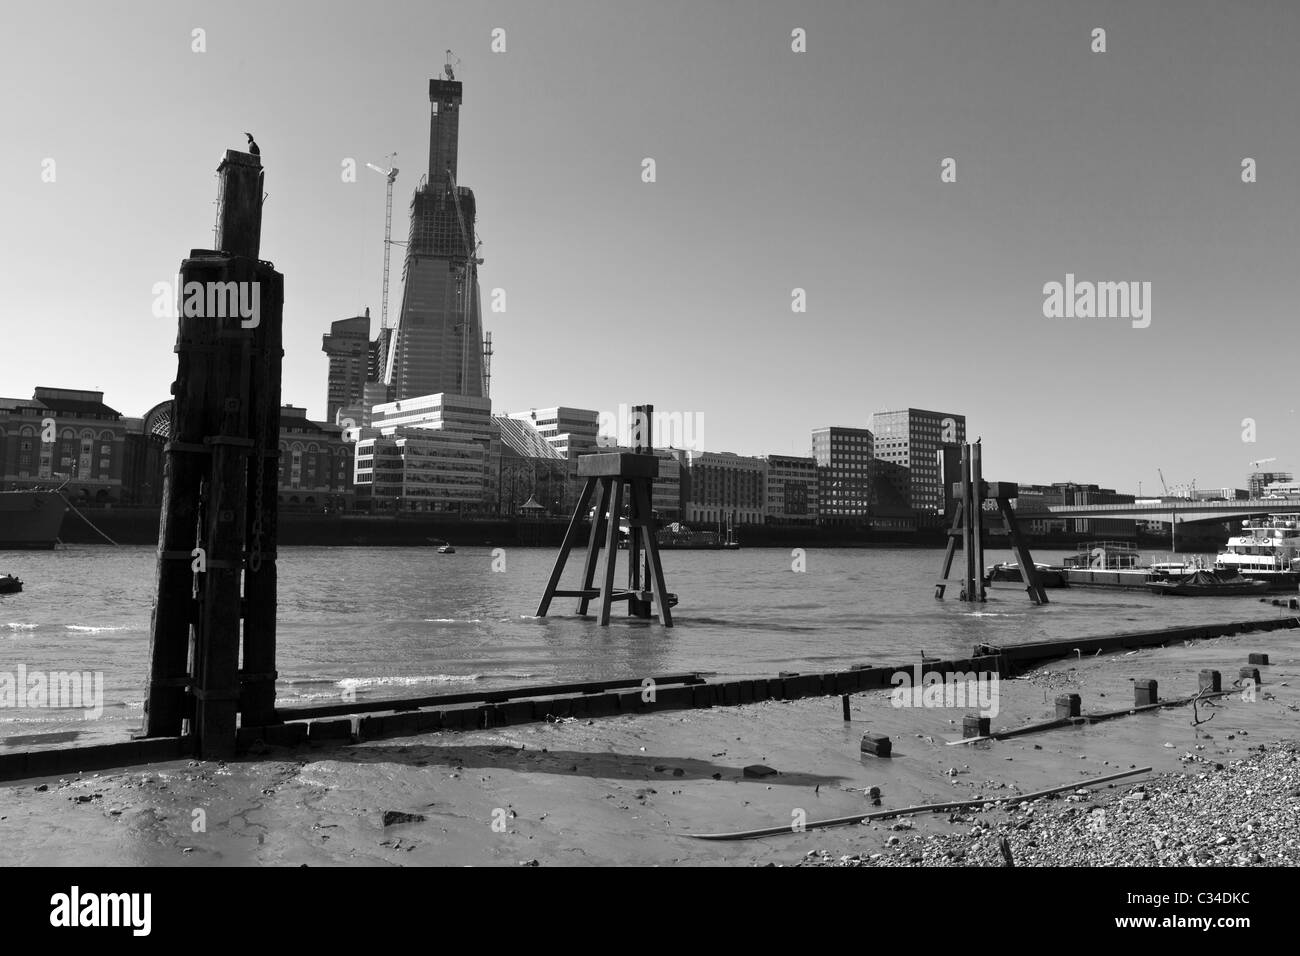 The Shard of Glass skyscraper under construction. Taken from the river Thames at low tide, London, UK. Stock Photo